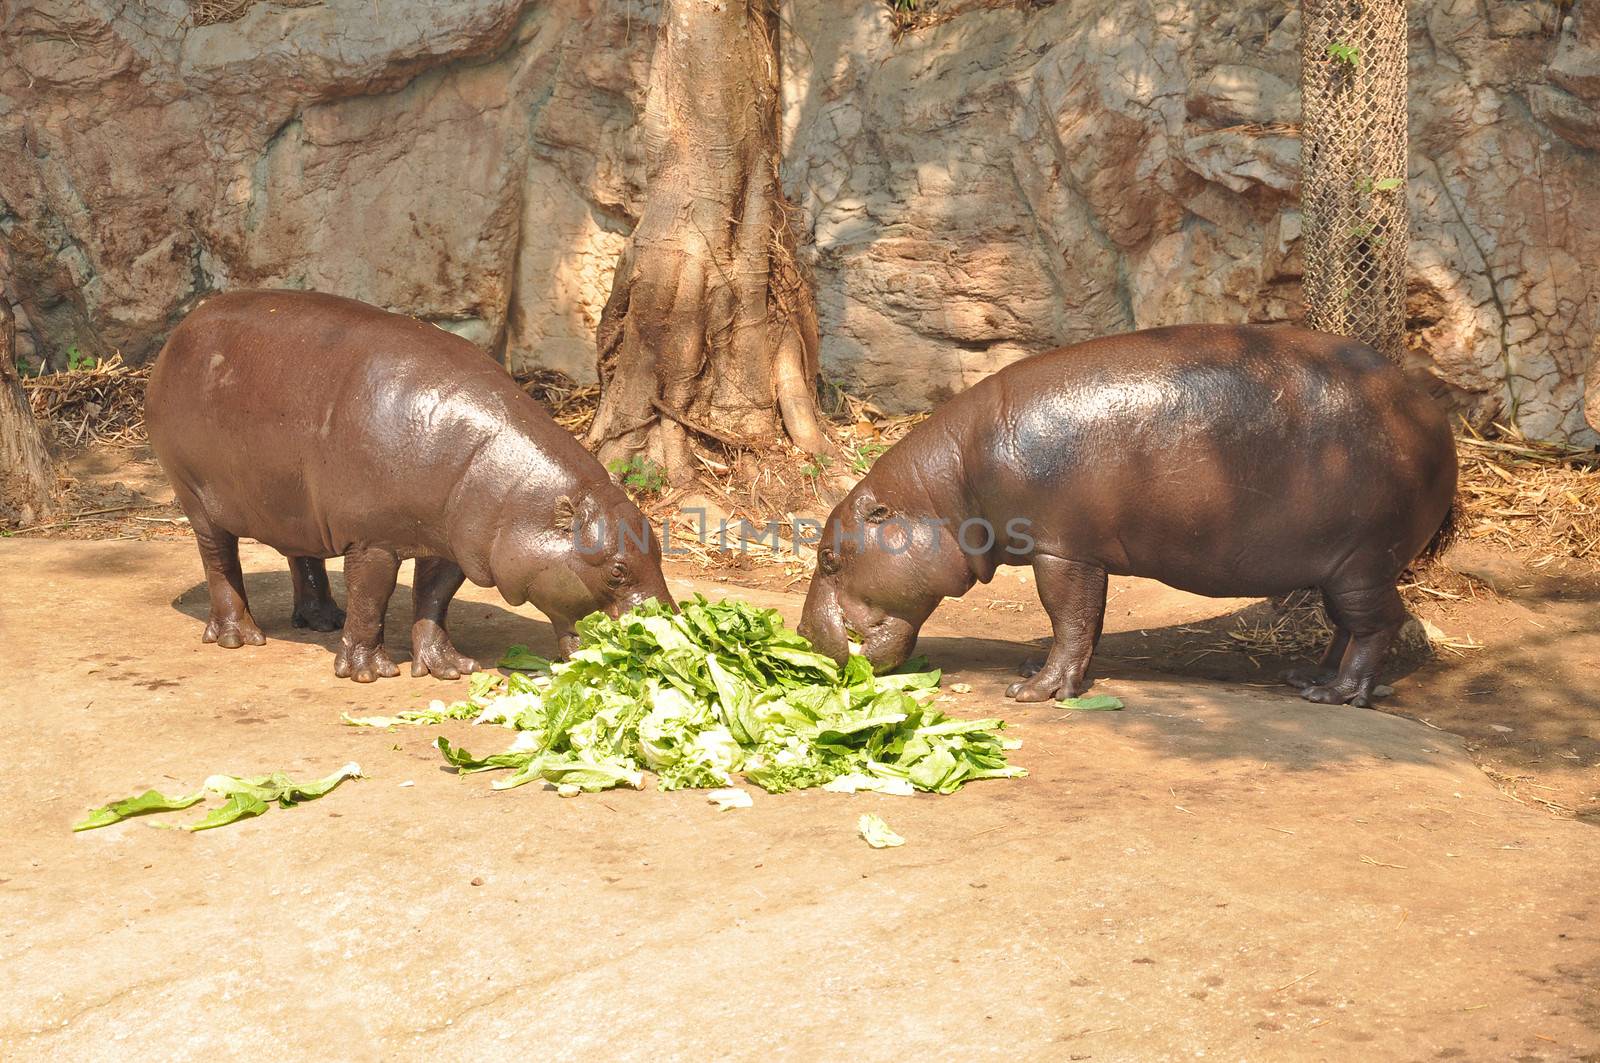 Pygmy hippopotamus skin is greenish-black or brown, shading to a creamy gray on the lower body.